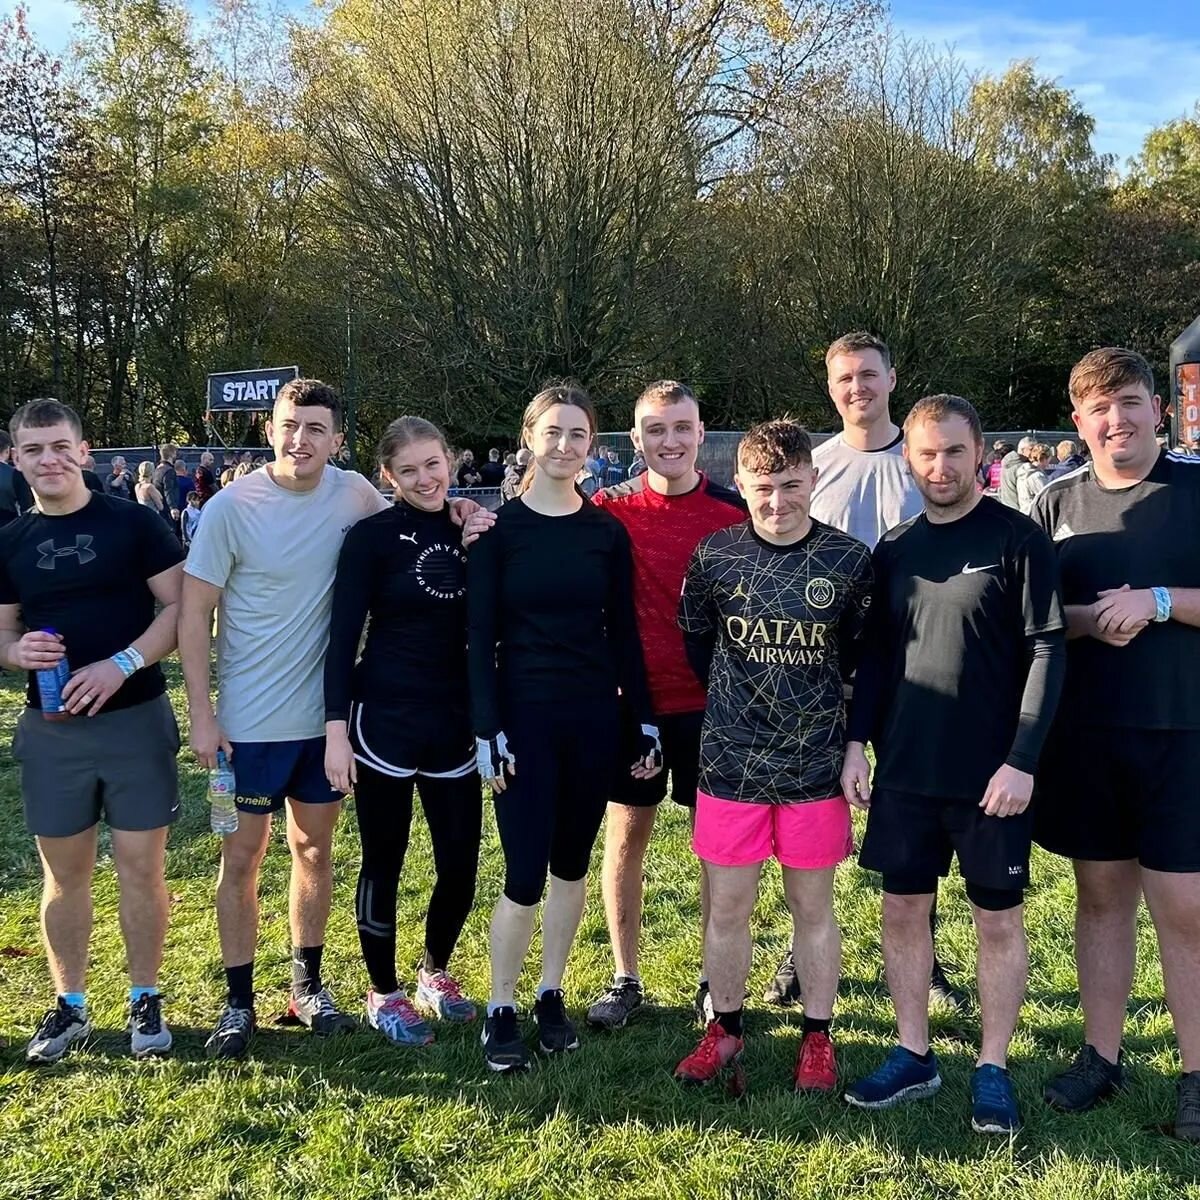 Before &gt; during &gt; after!

Big team building session at @toughmudder 
from some of the promaccers and friends... cracking day!